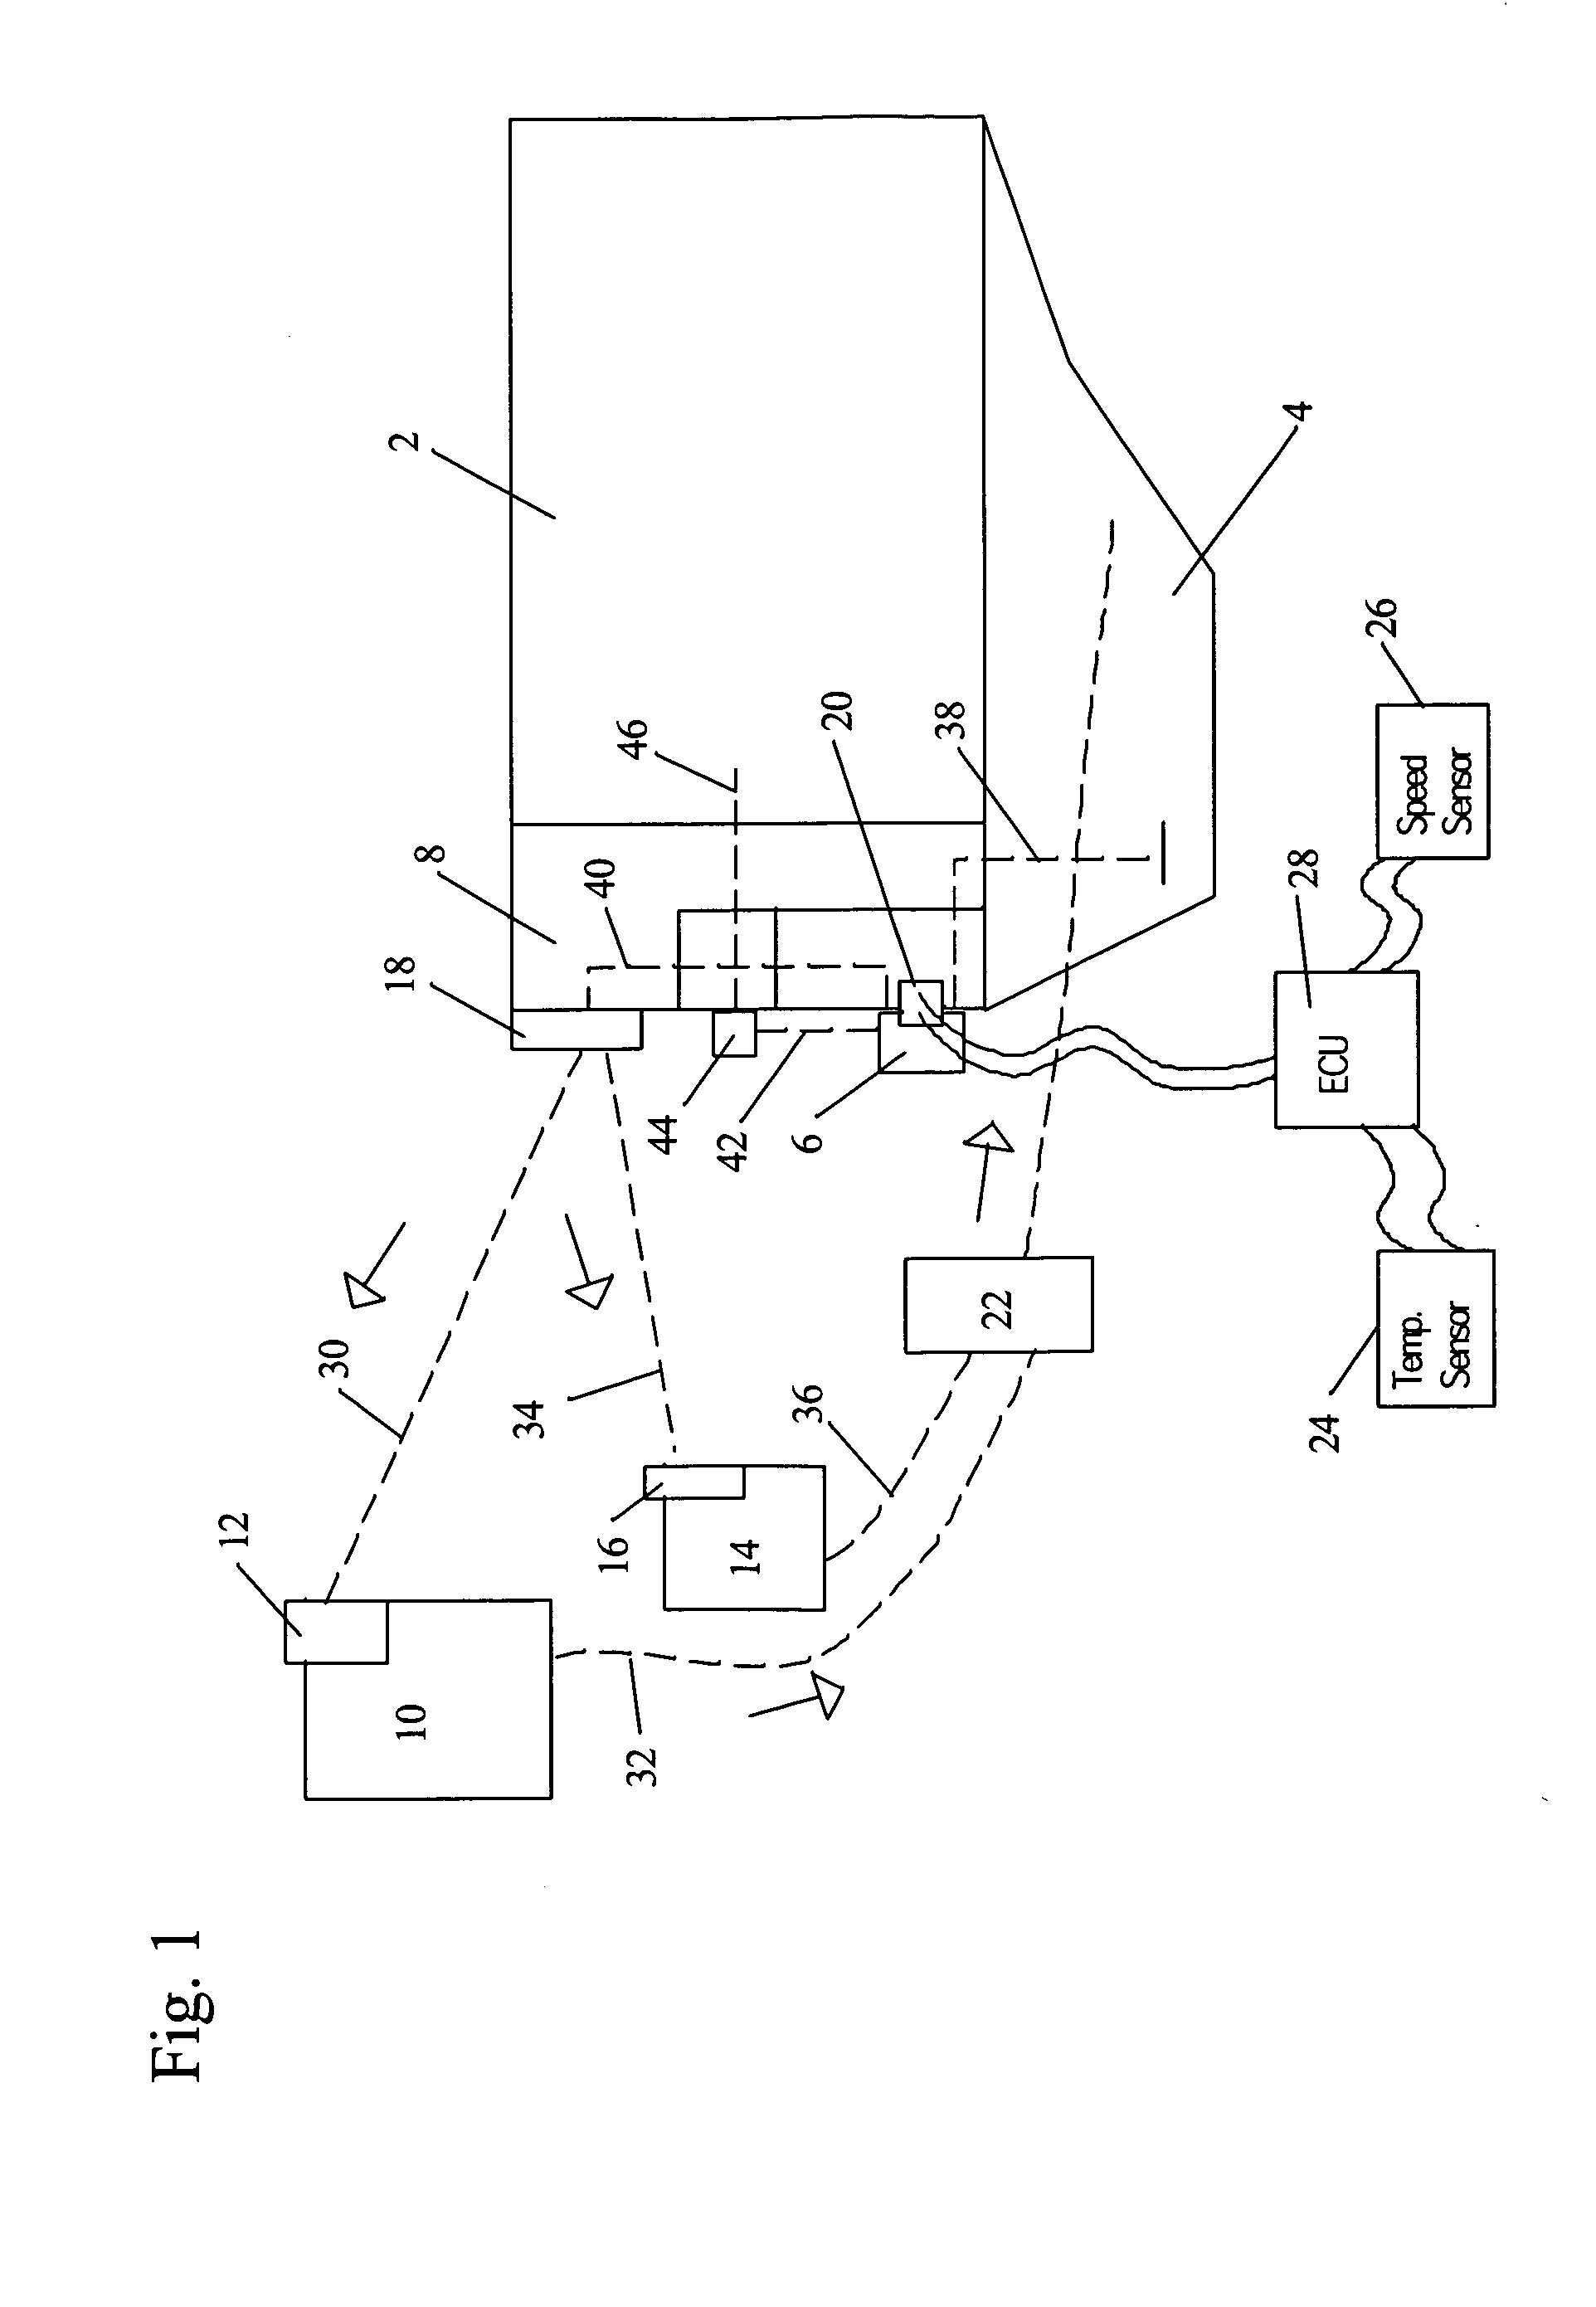 System and method of providing hydraulic pressure for mechanical work from an engine lubricating system